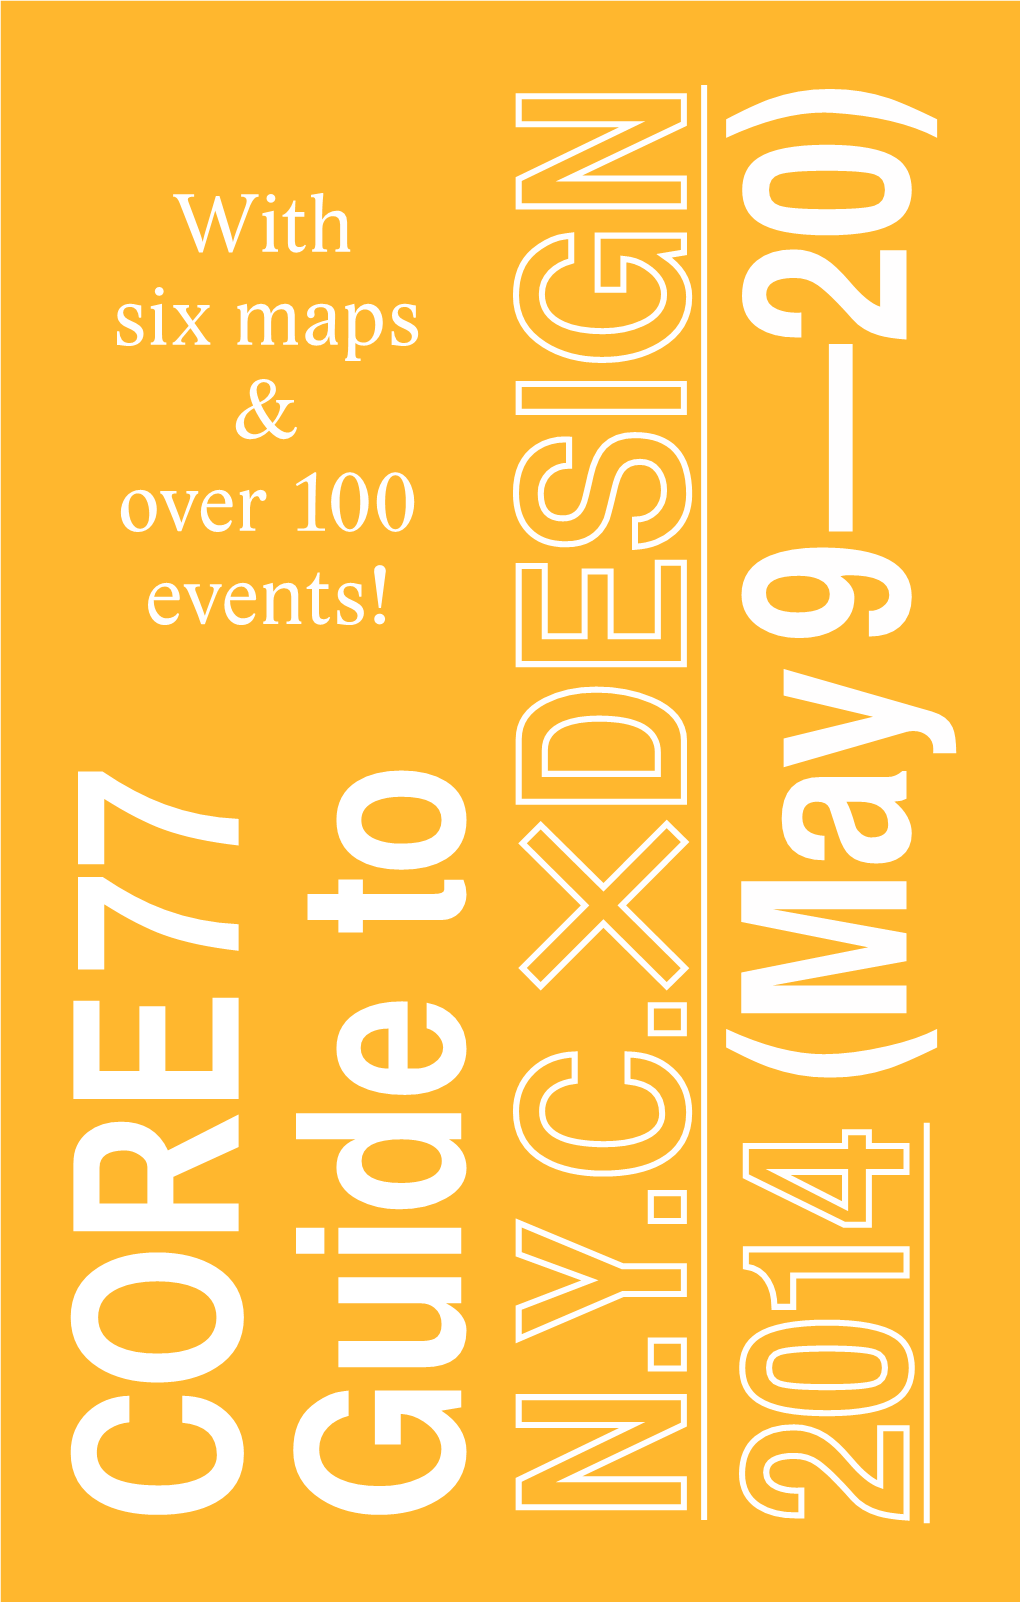 With Six Maps & Over 100 Events!